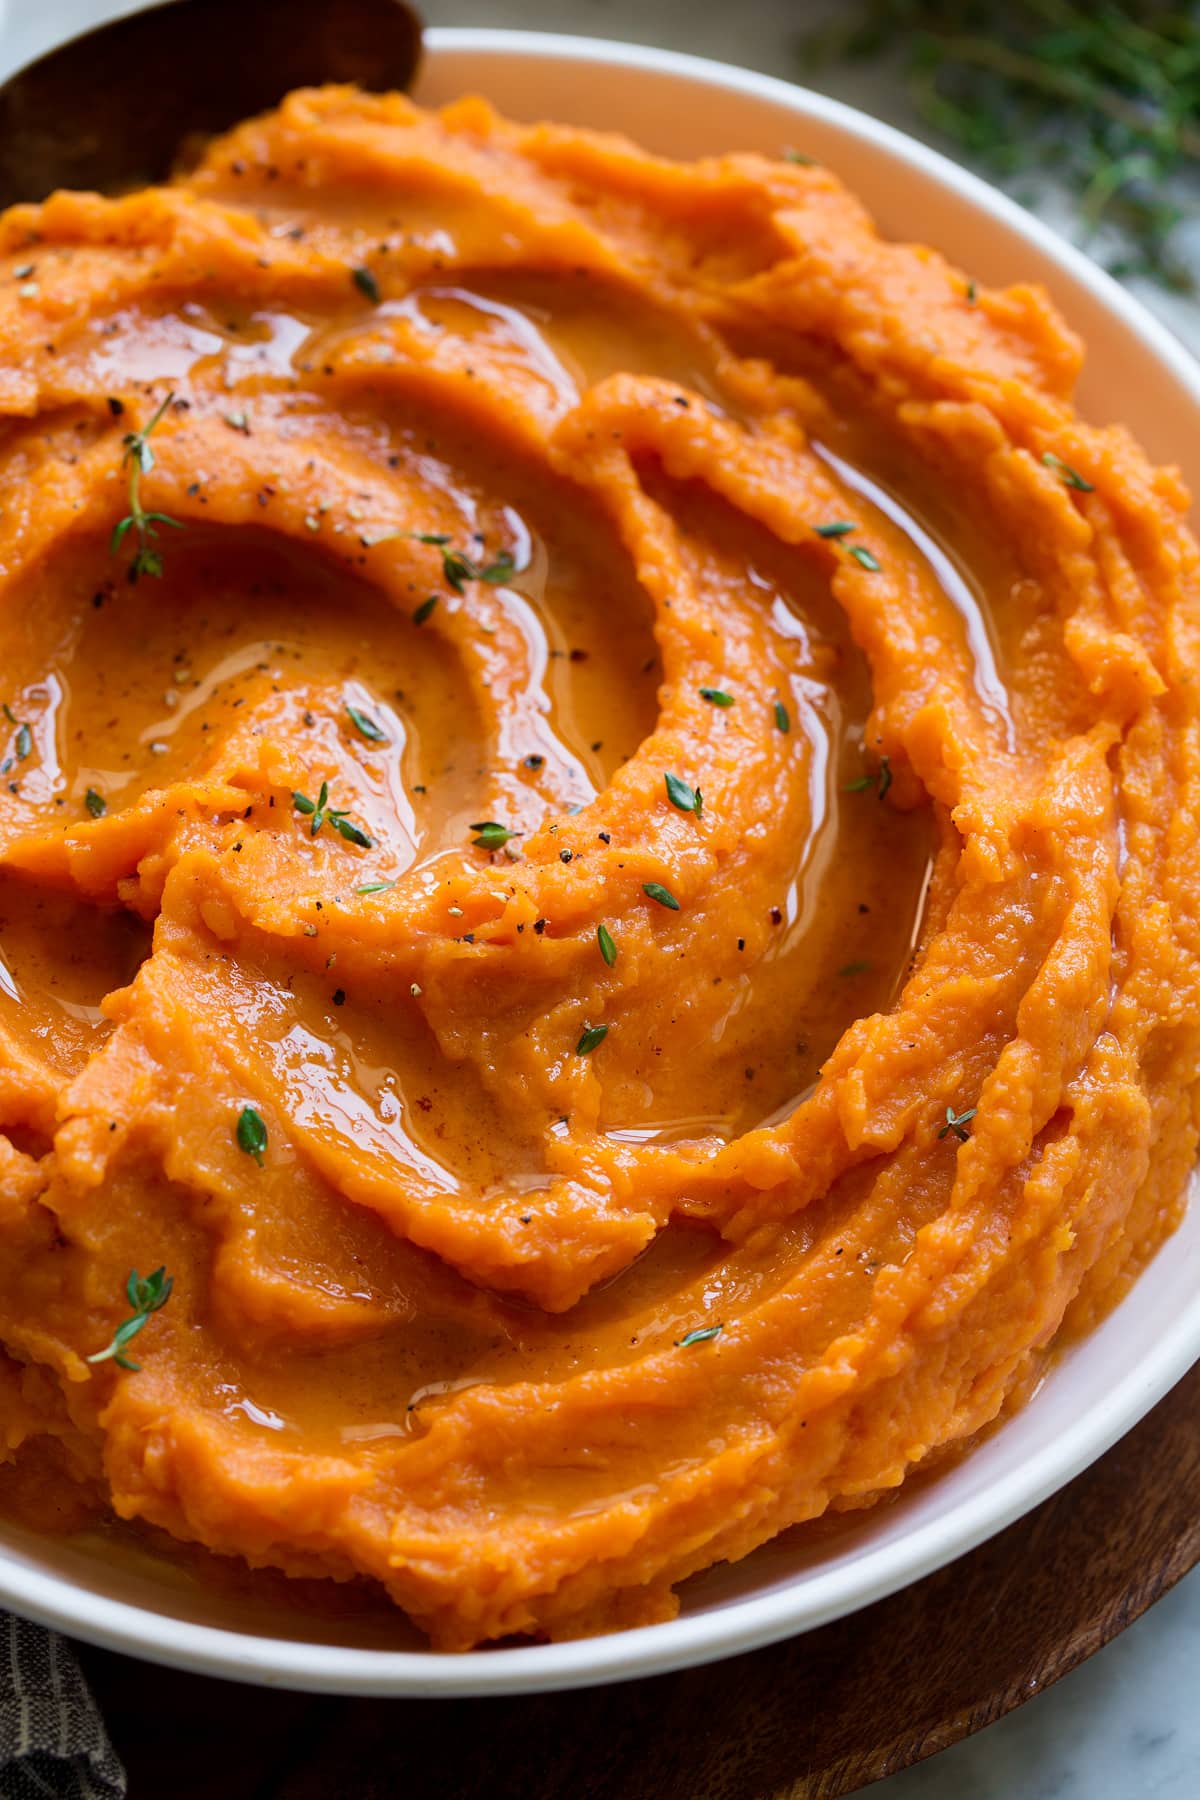 Side view of mashed sweet potatoes.